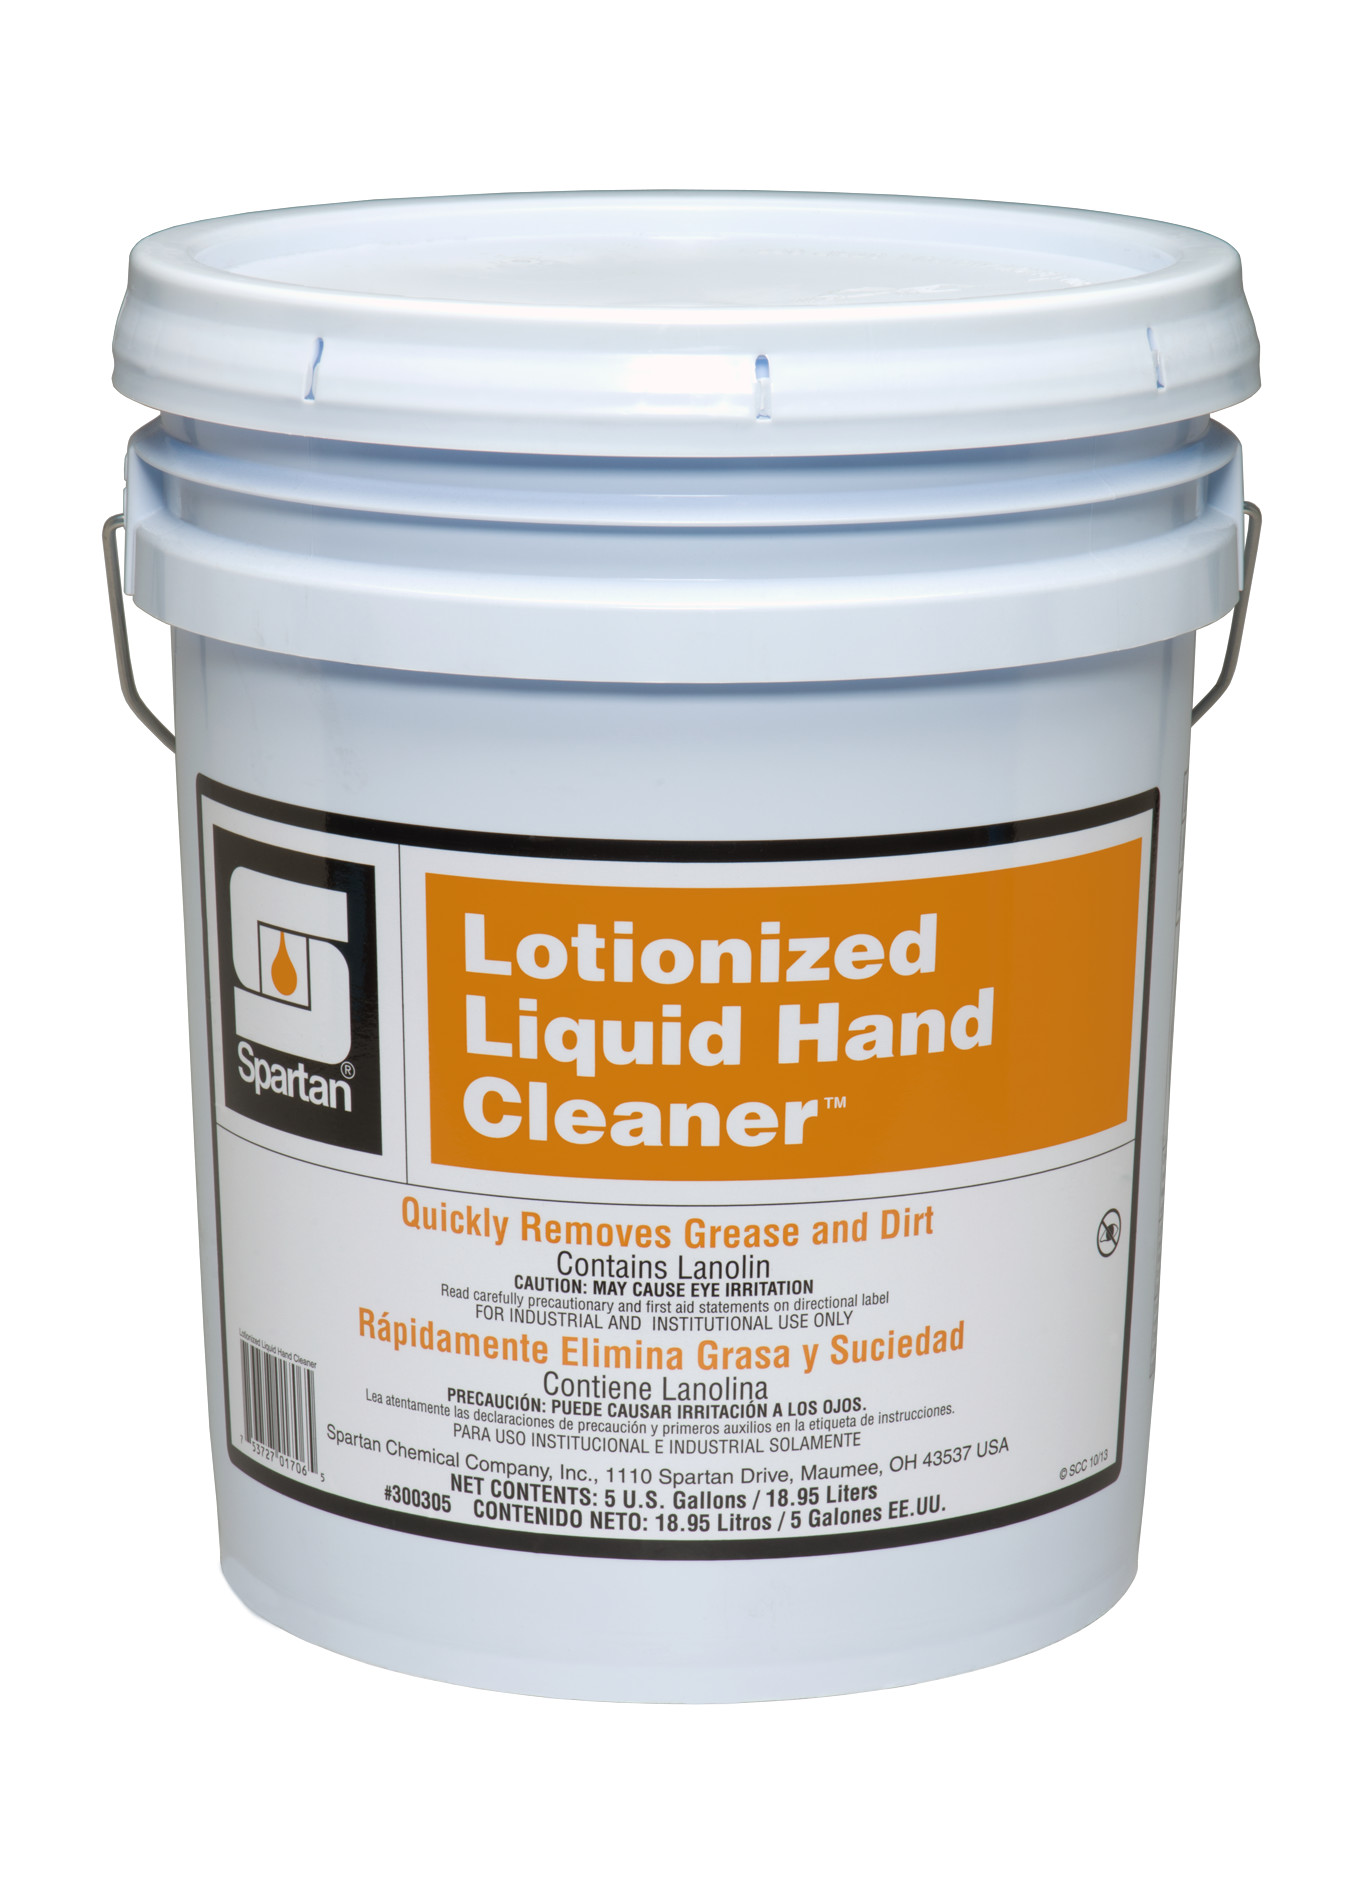 Spartan Chemical Company Lotionized Liquid Hand Cleaner, 5 GAL PAIL